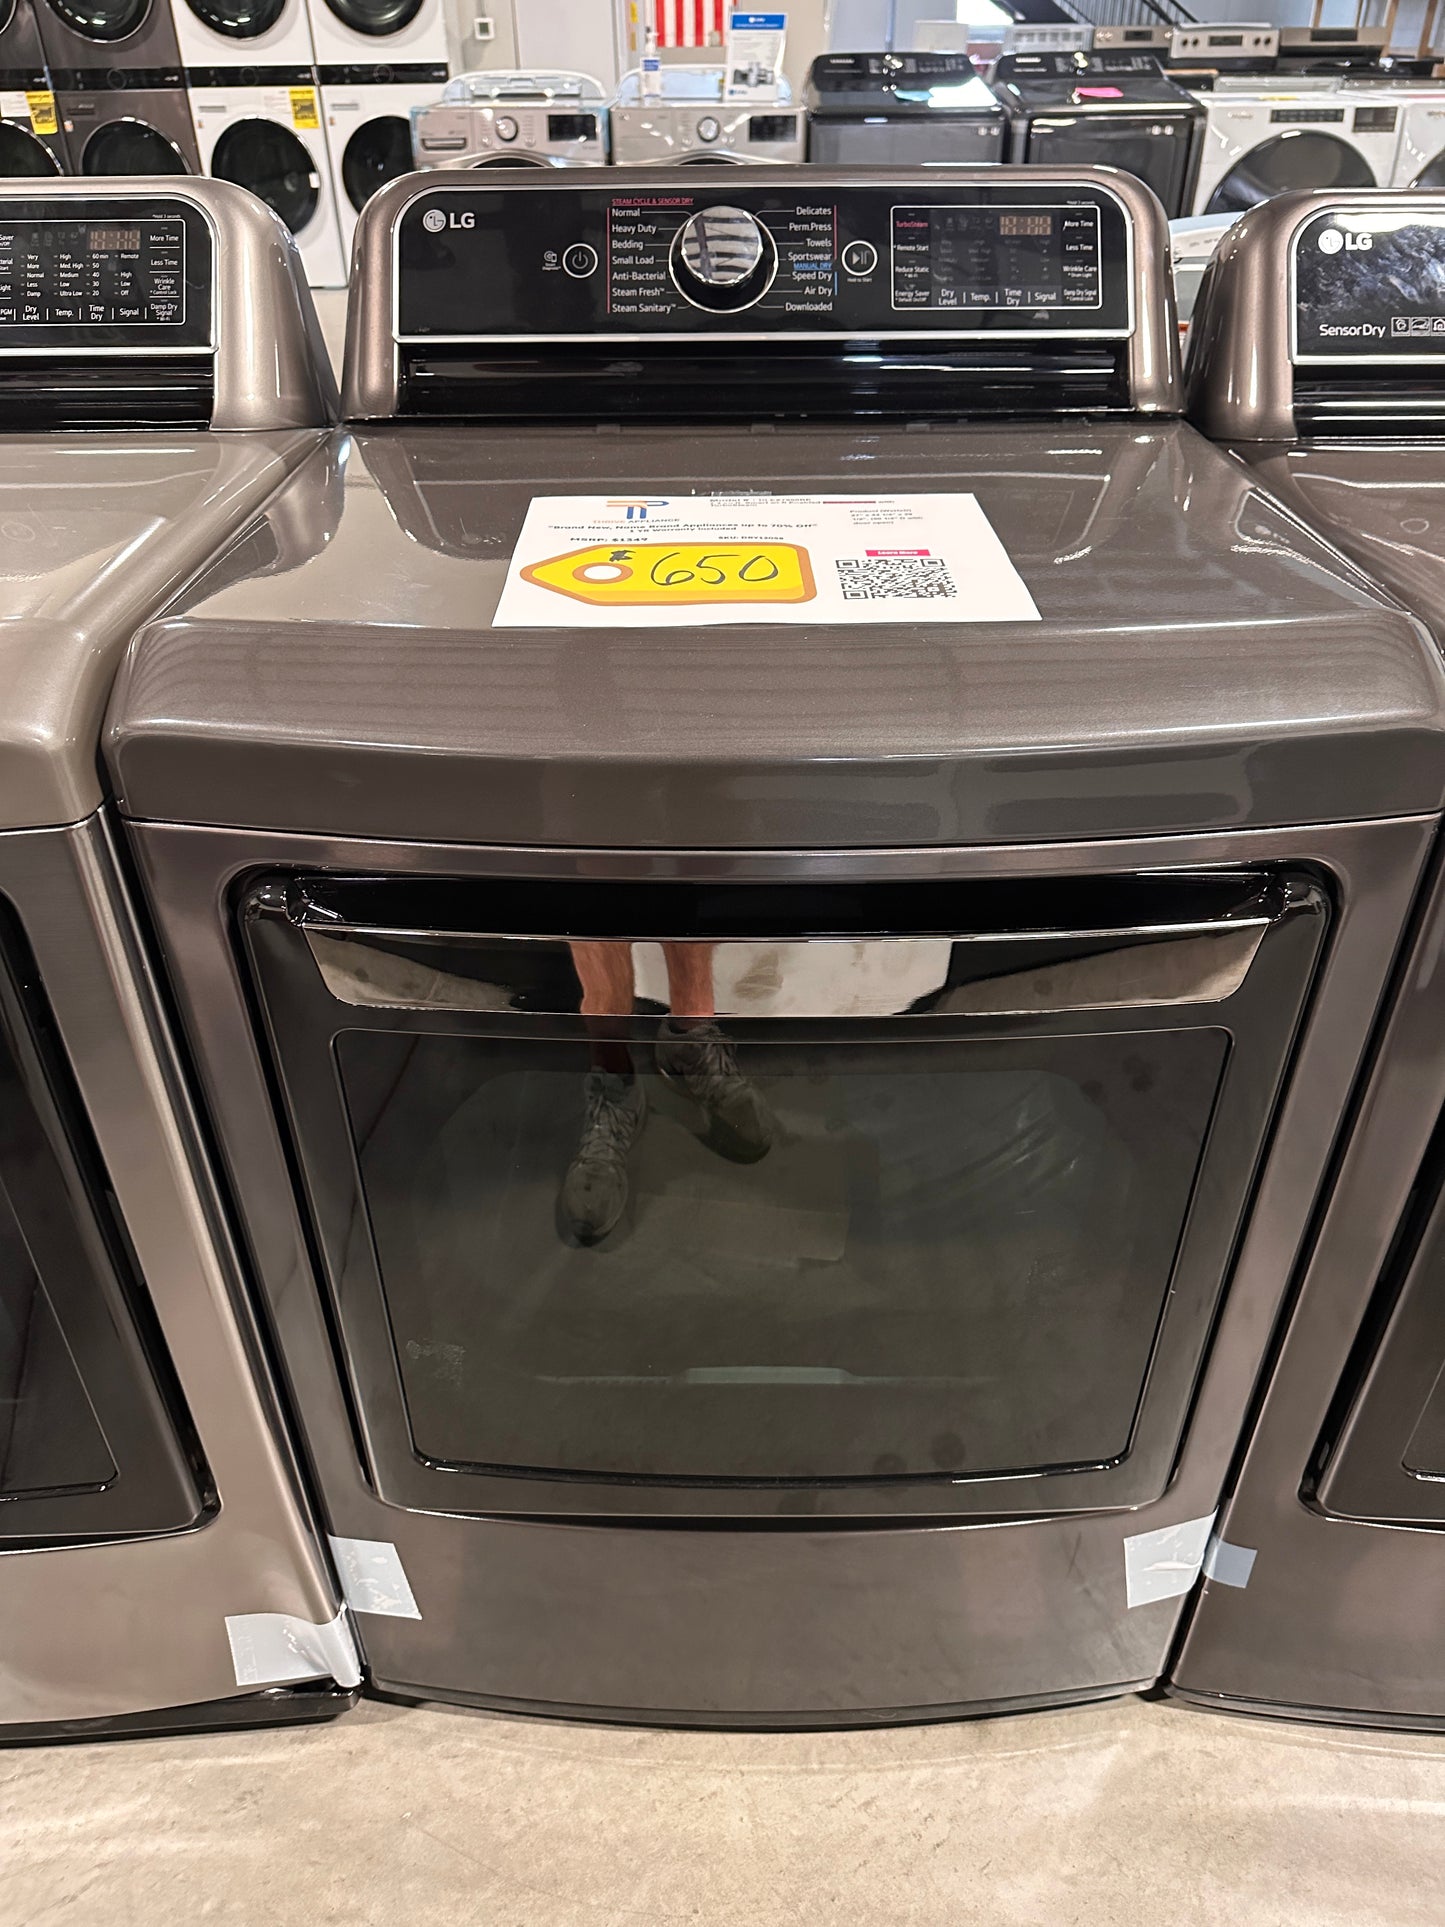 Model: DLEX7900BE SMART ELECTRIC DRYER - DRY12058